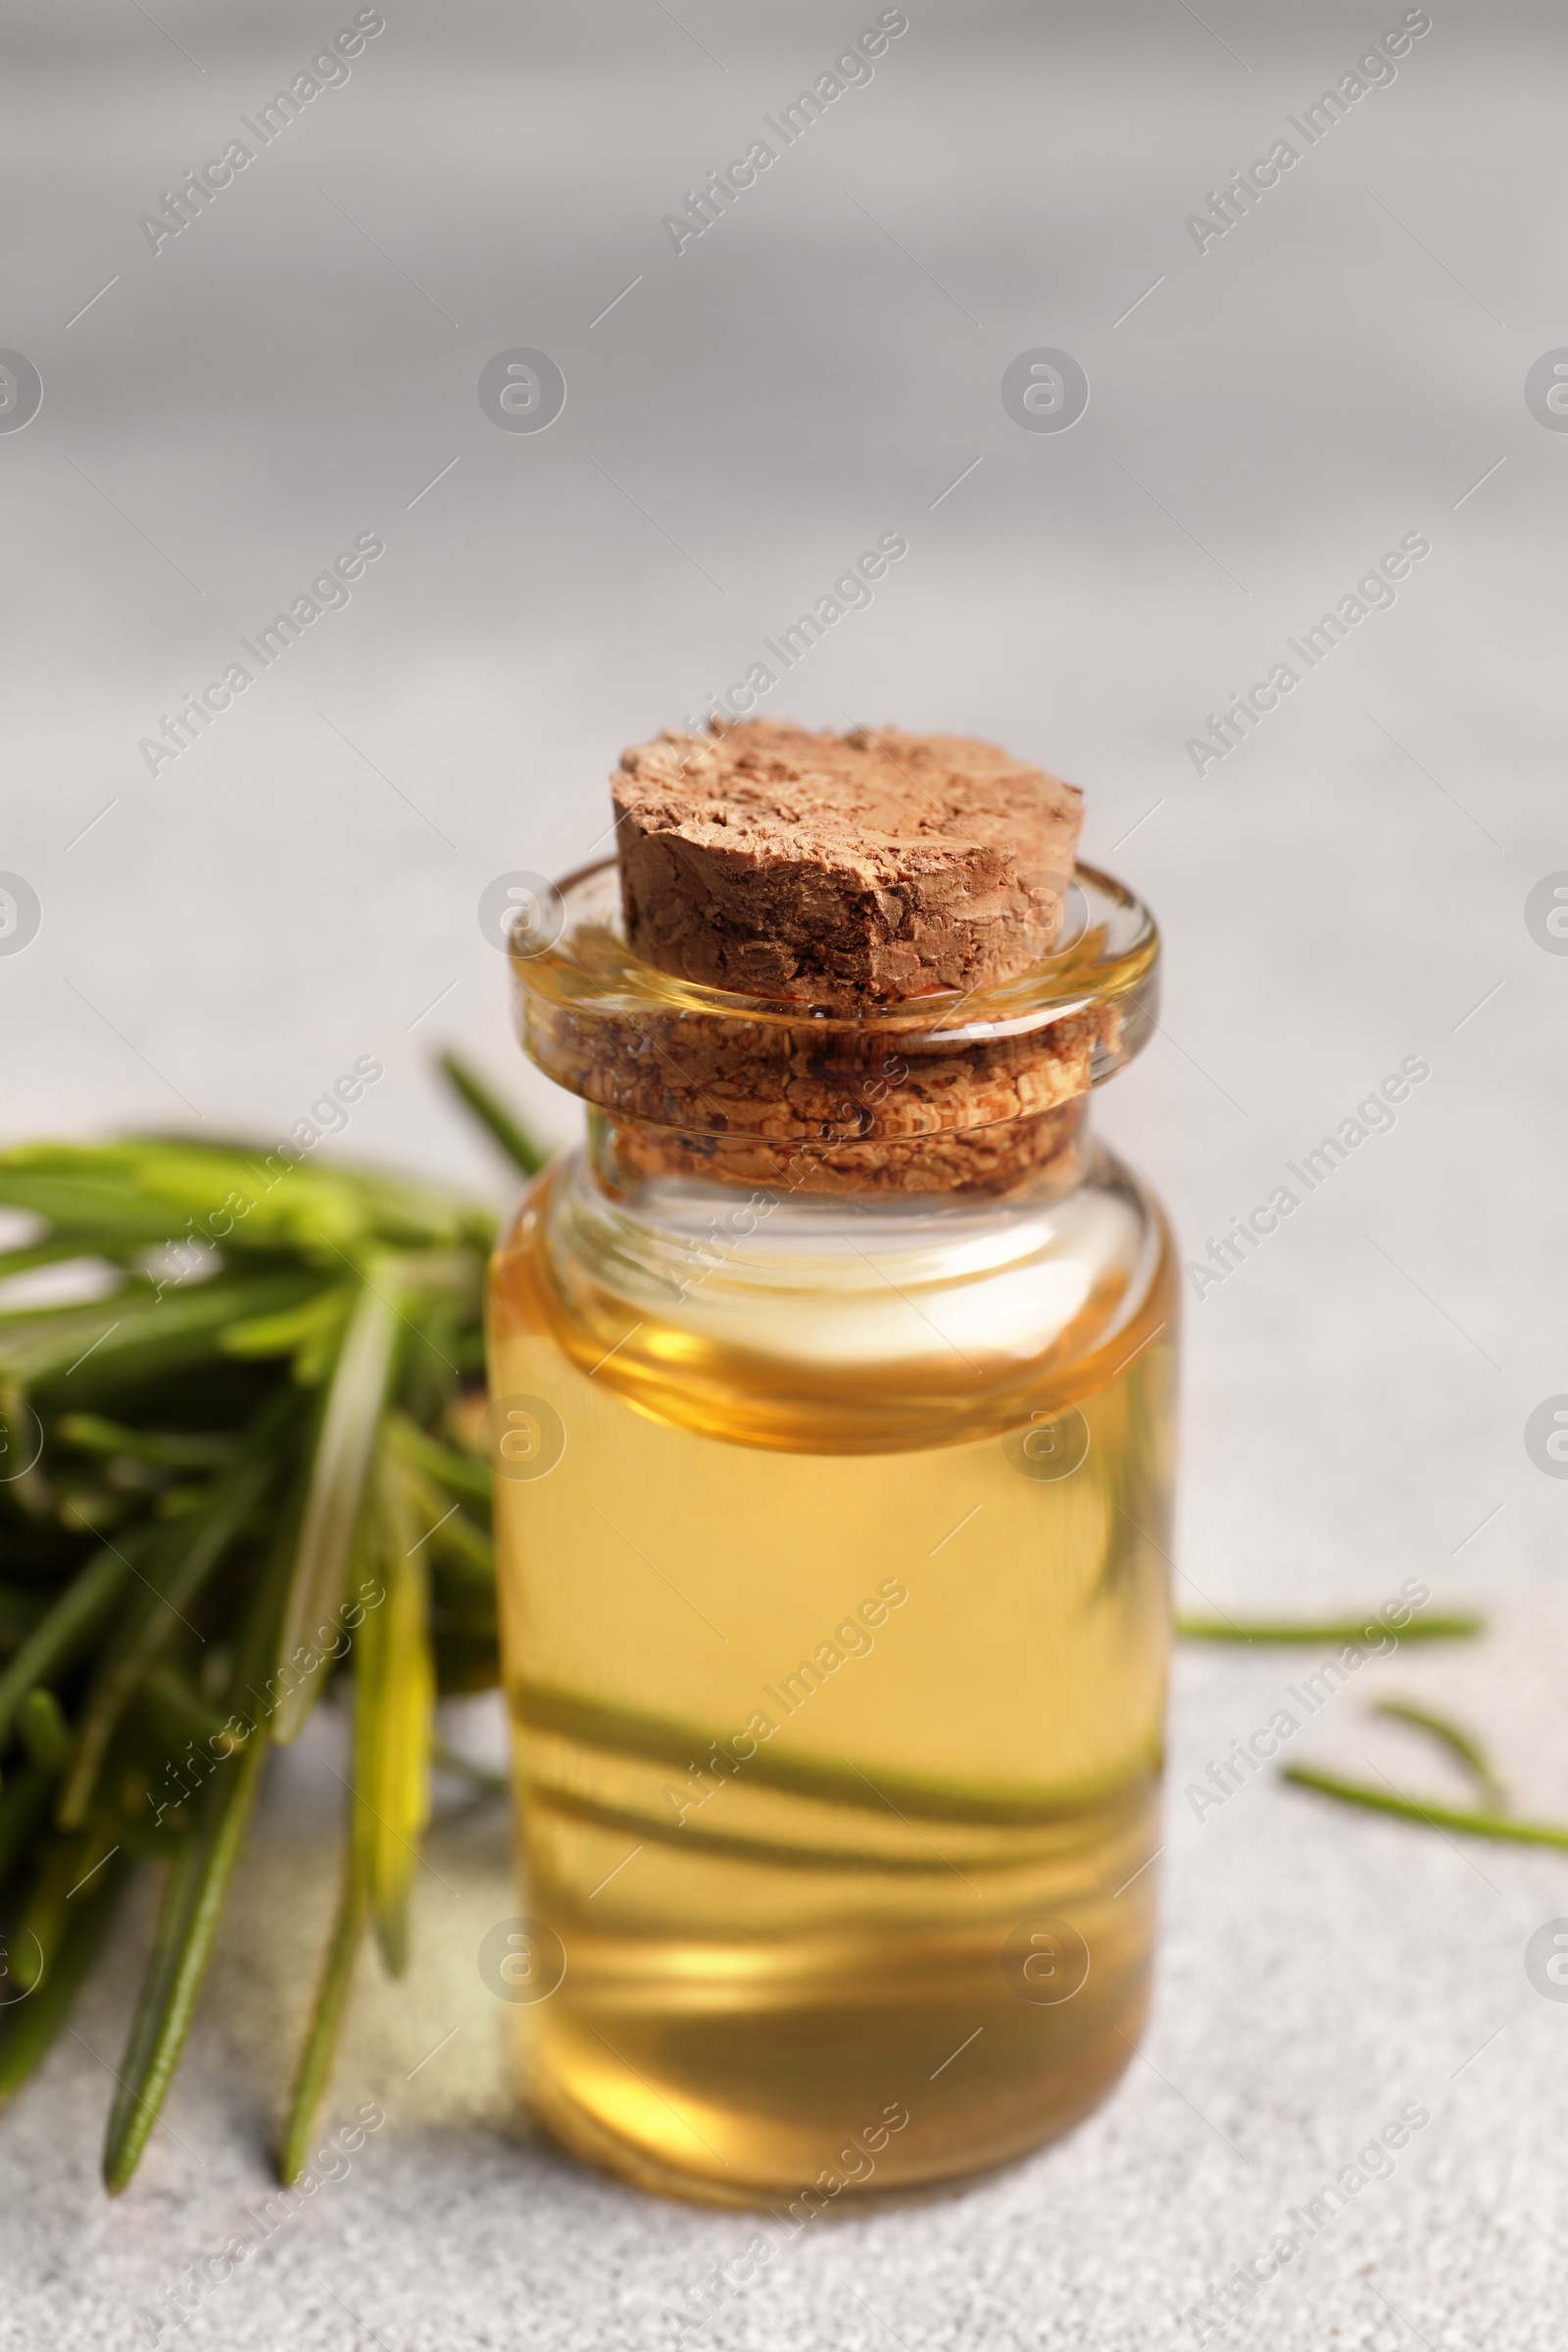 Photo of Bottle with essential oil and fresh rosemary on light textured table, closeup